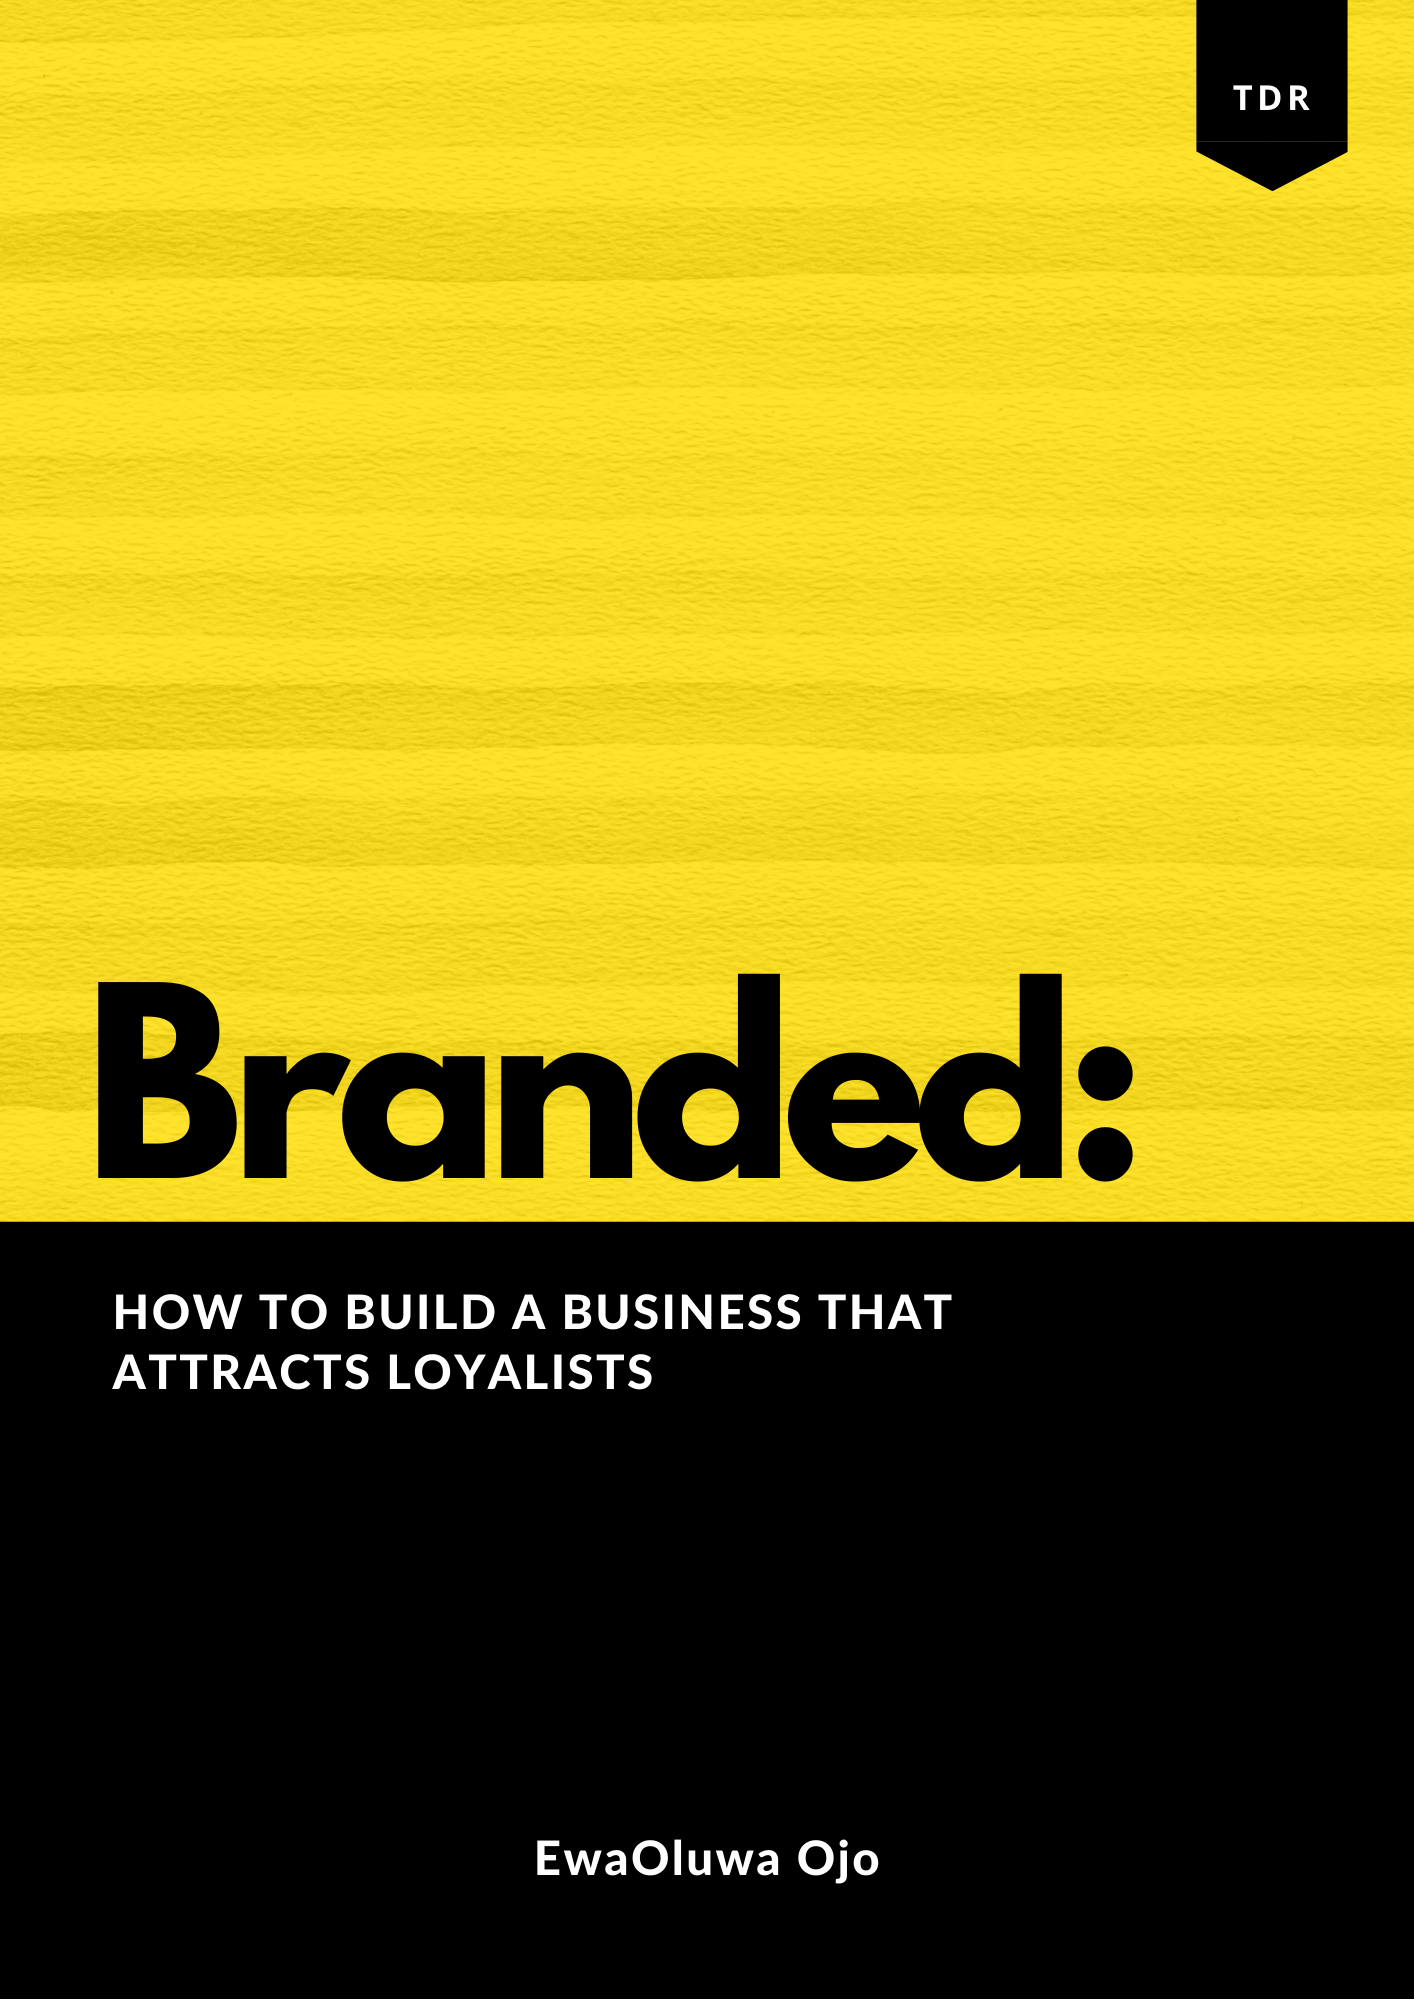 Branded: How to Build a Business that Attracts Loyalists